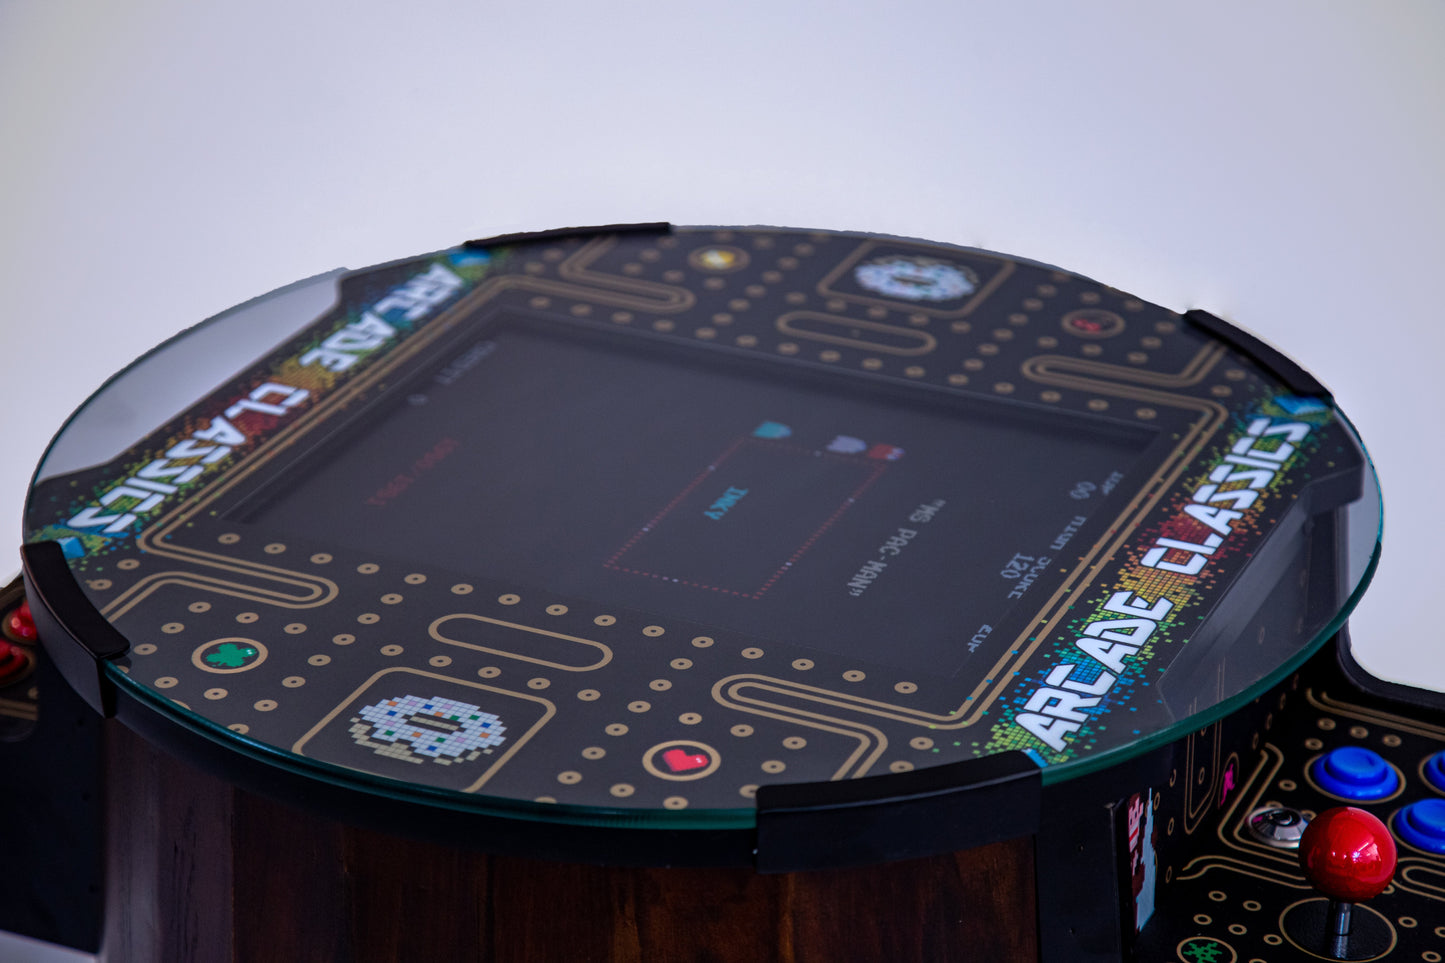 Barrel Arcade Game with 456 Classic & Golden Age Games